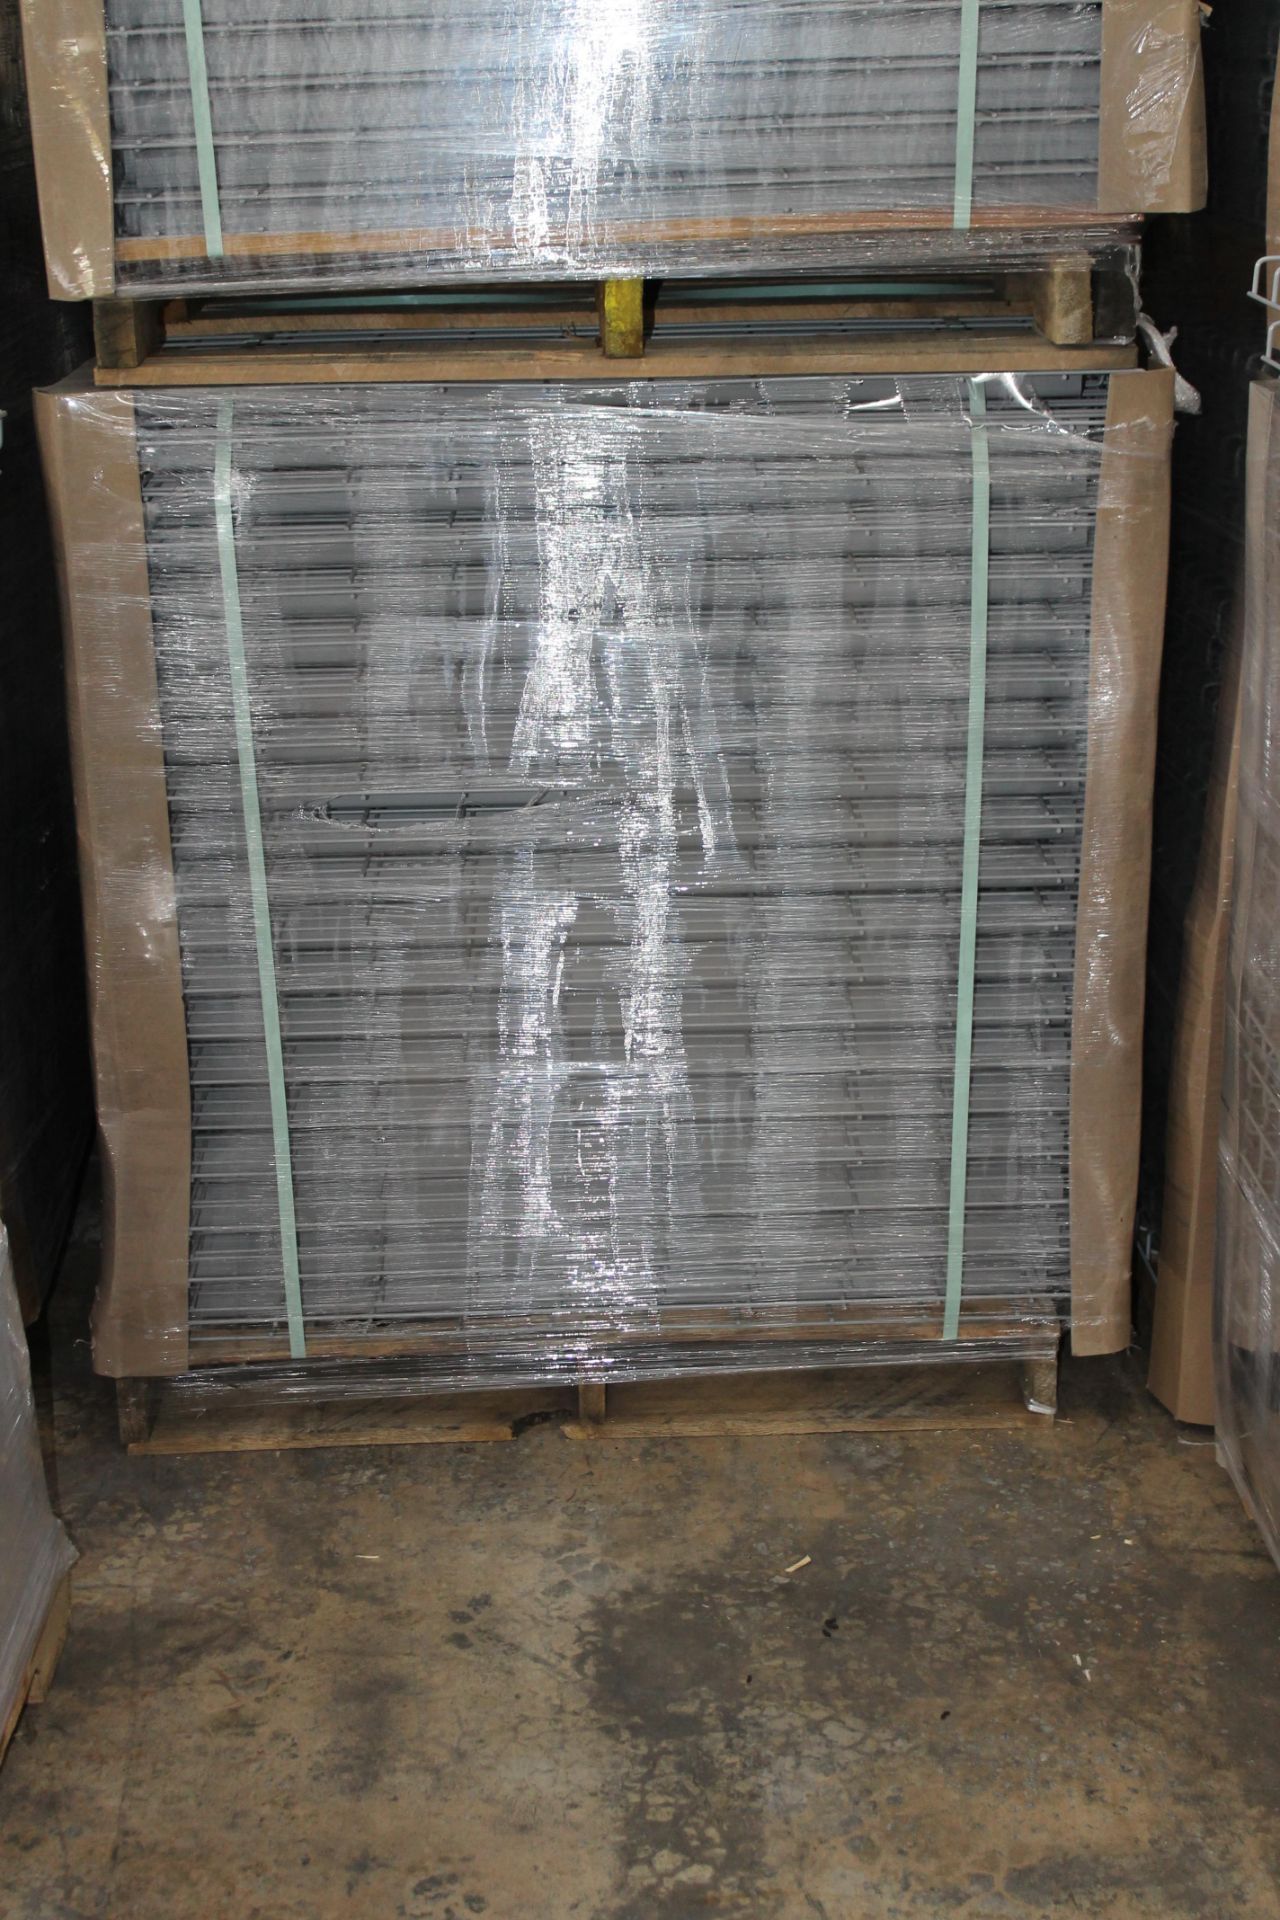 NEW 80 PCS OF STANDARD 42" X 46" WIREDECK - 2200 LBS CAPACITY